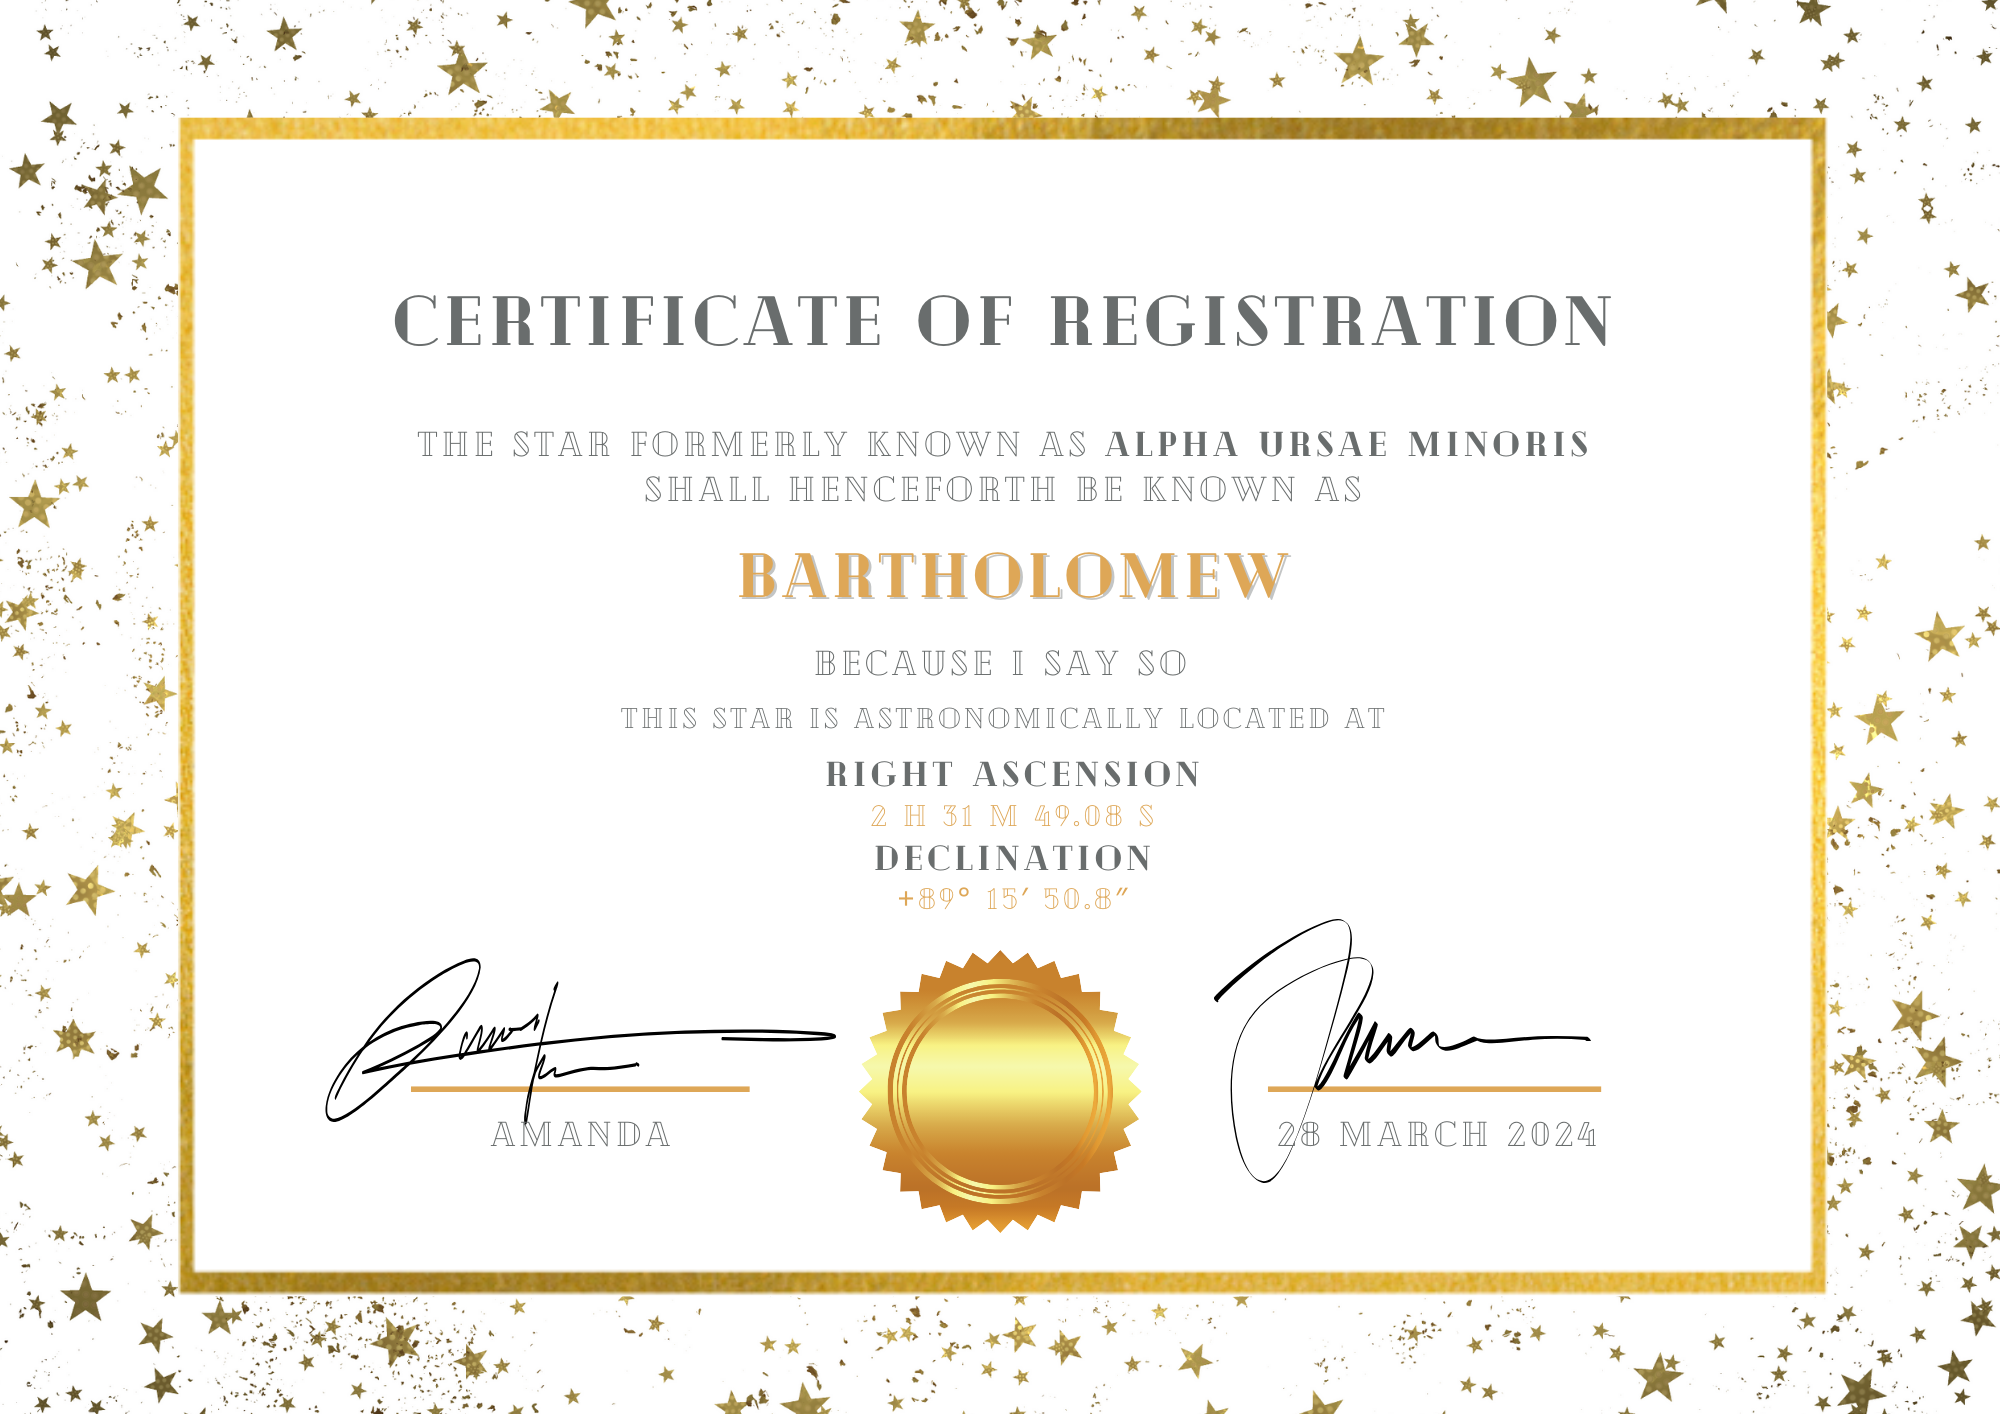 A certificate of registration created in Canva which renames the North Star to "Bartholomew."